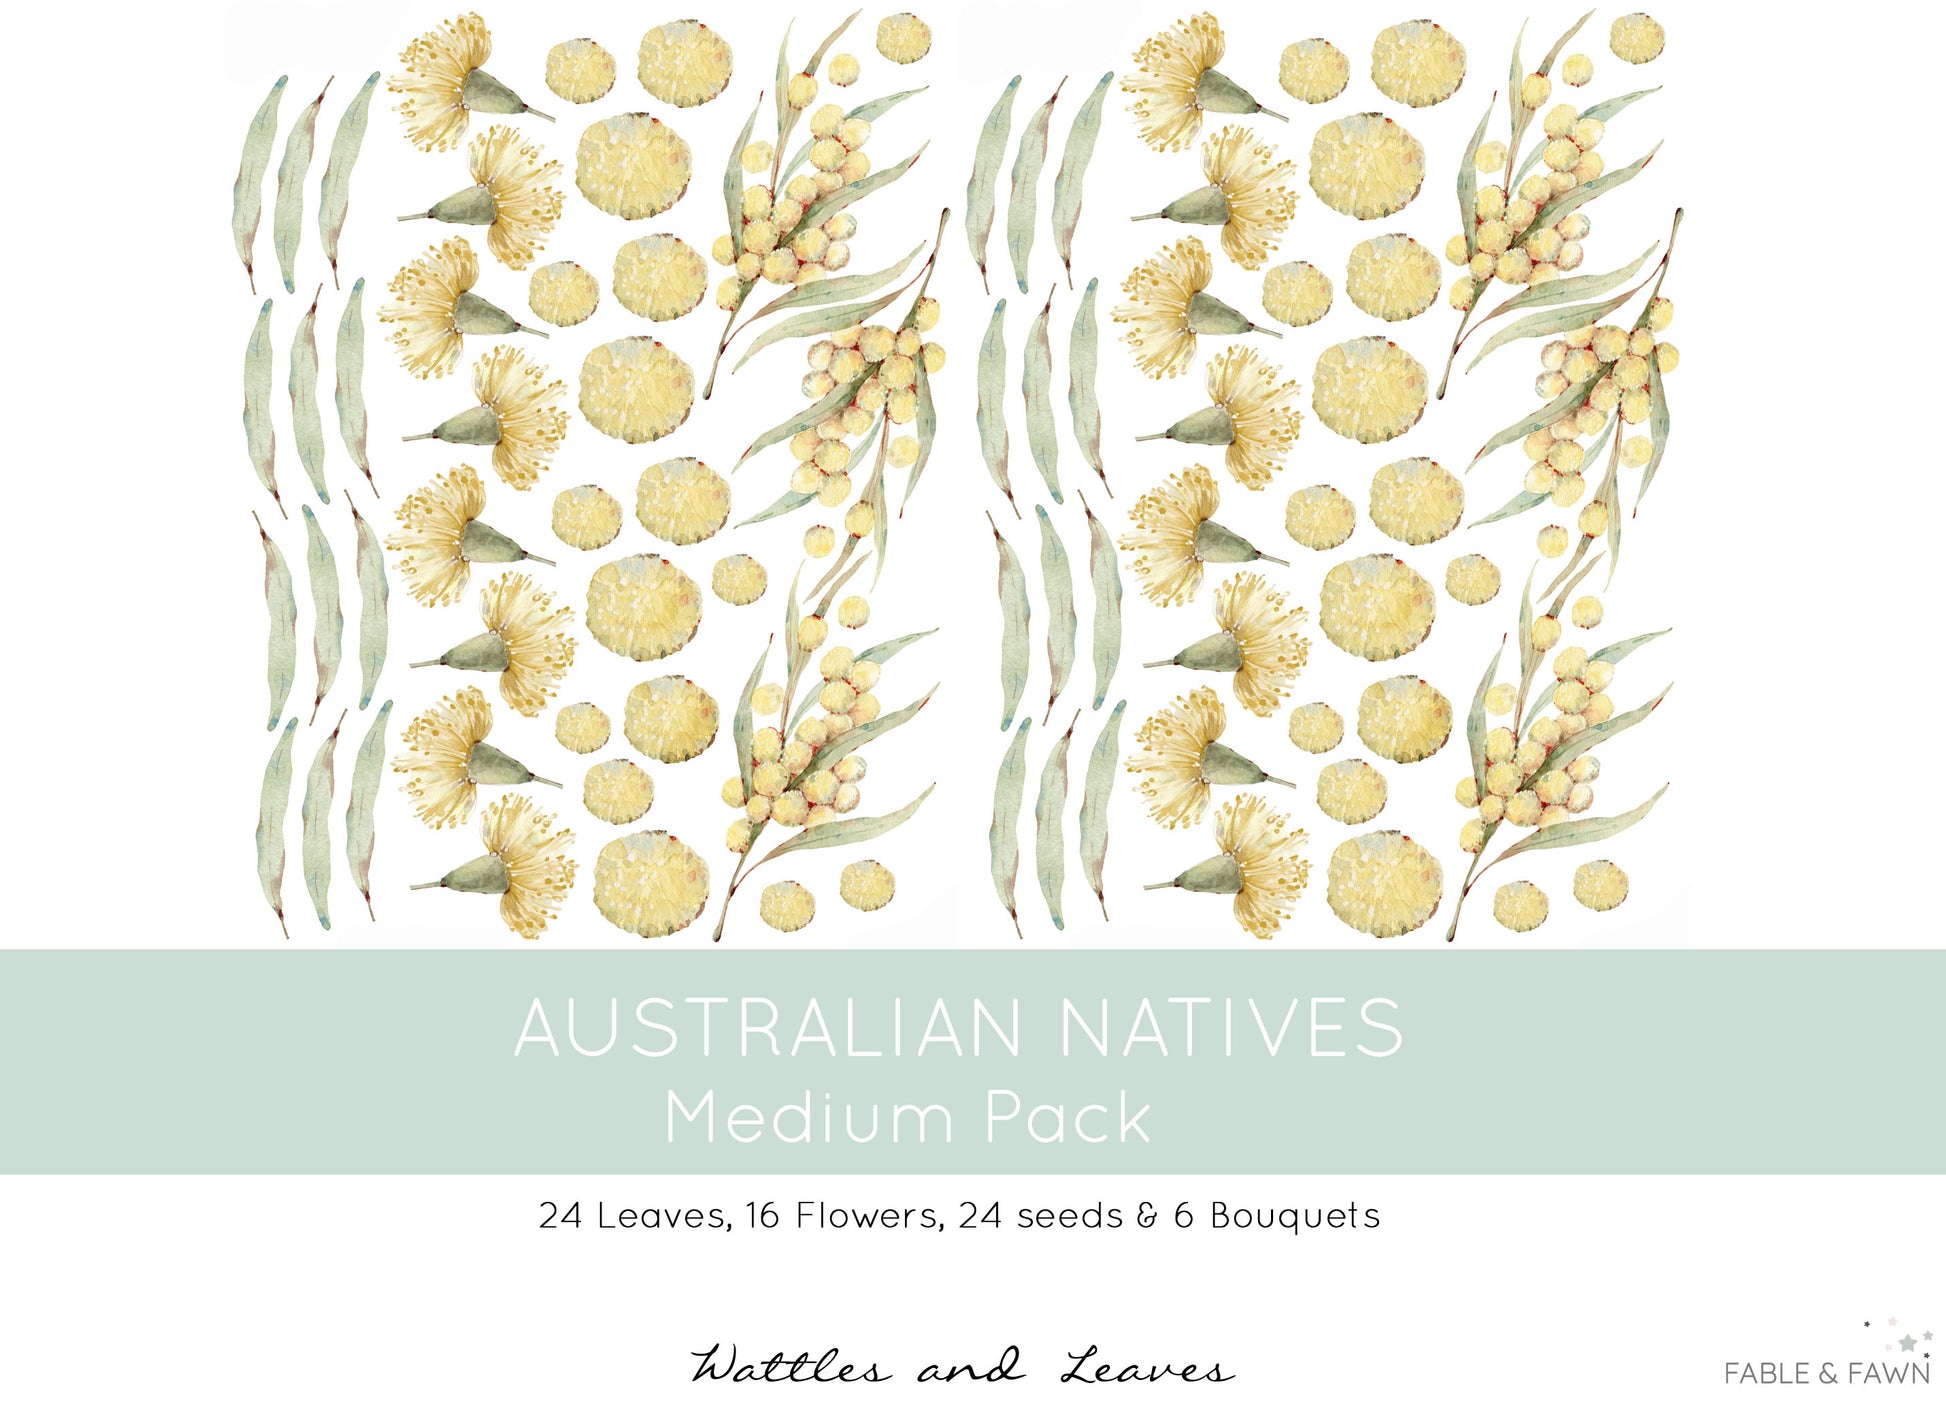 Australian Native Decals - Wattle - Wall Decals Australia - Fable and Fawn 